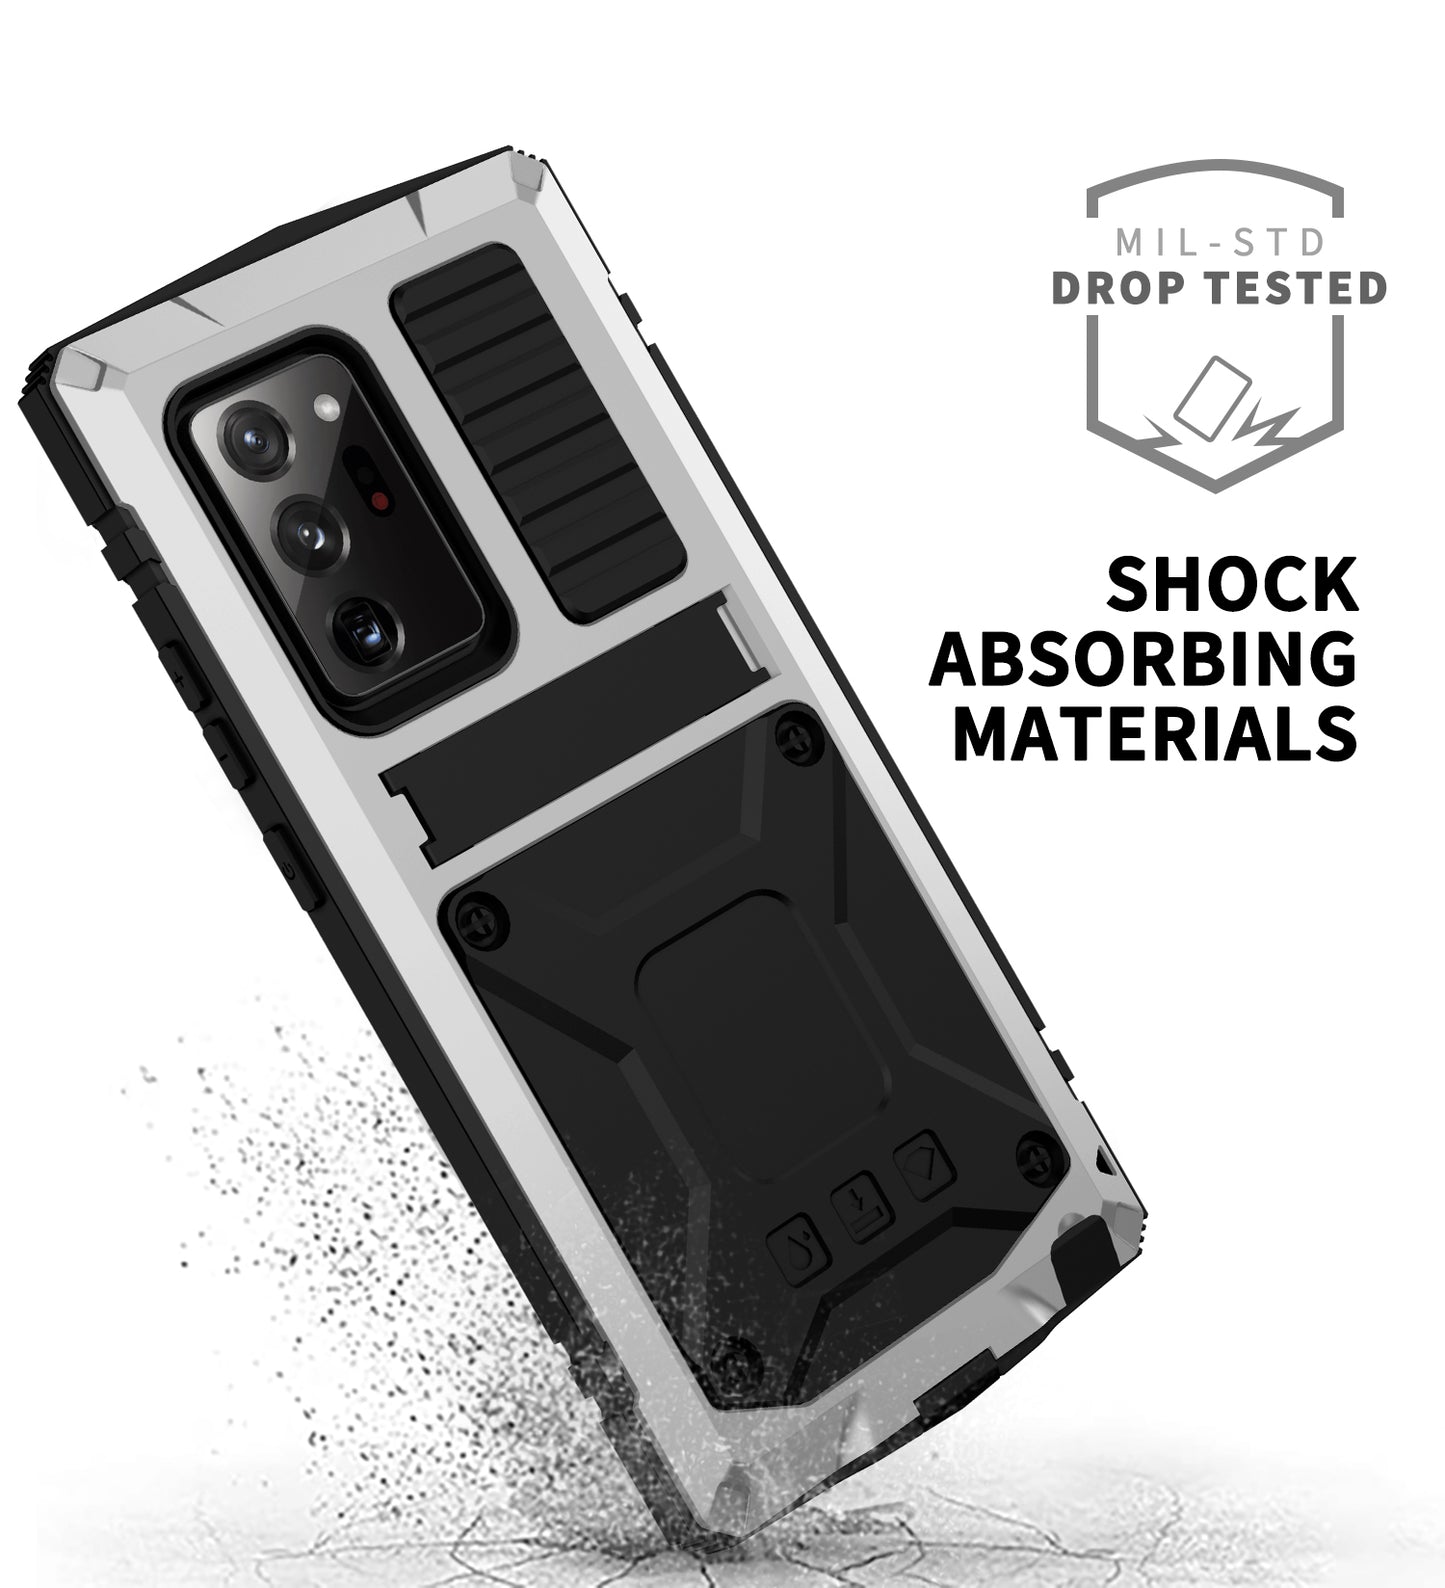 R-Just Kickstand Waterproof Aluminum Metal Outdoor Military Heavy Duty Case Cover